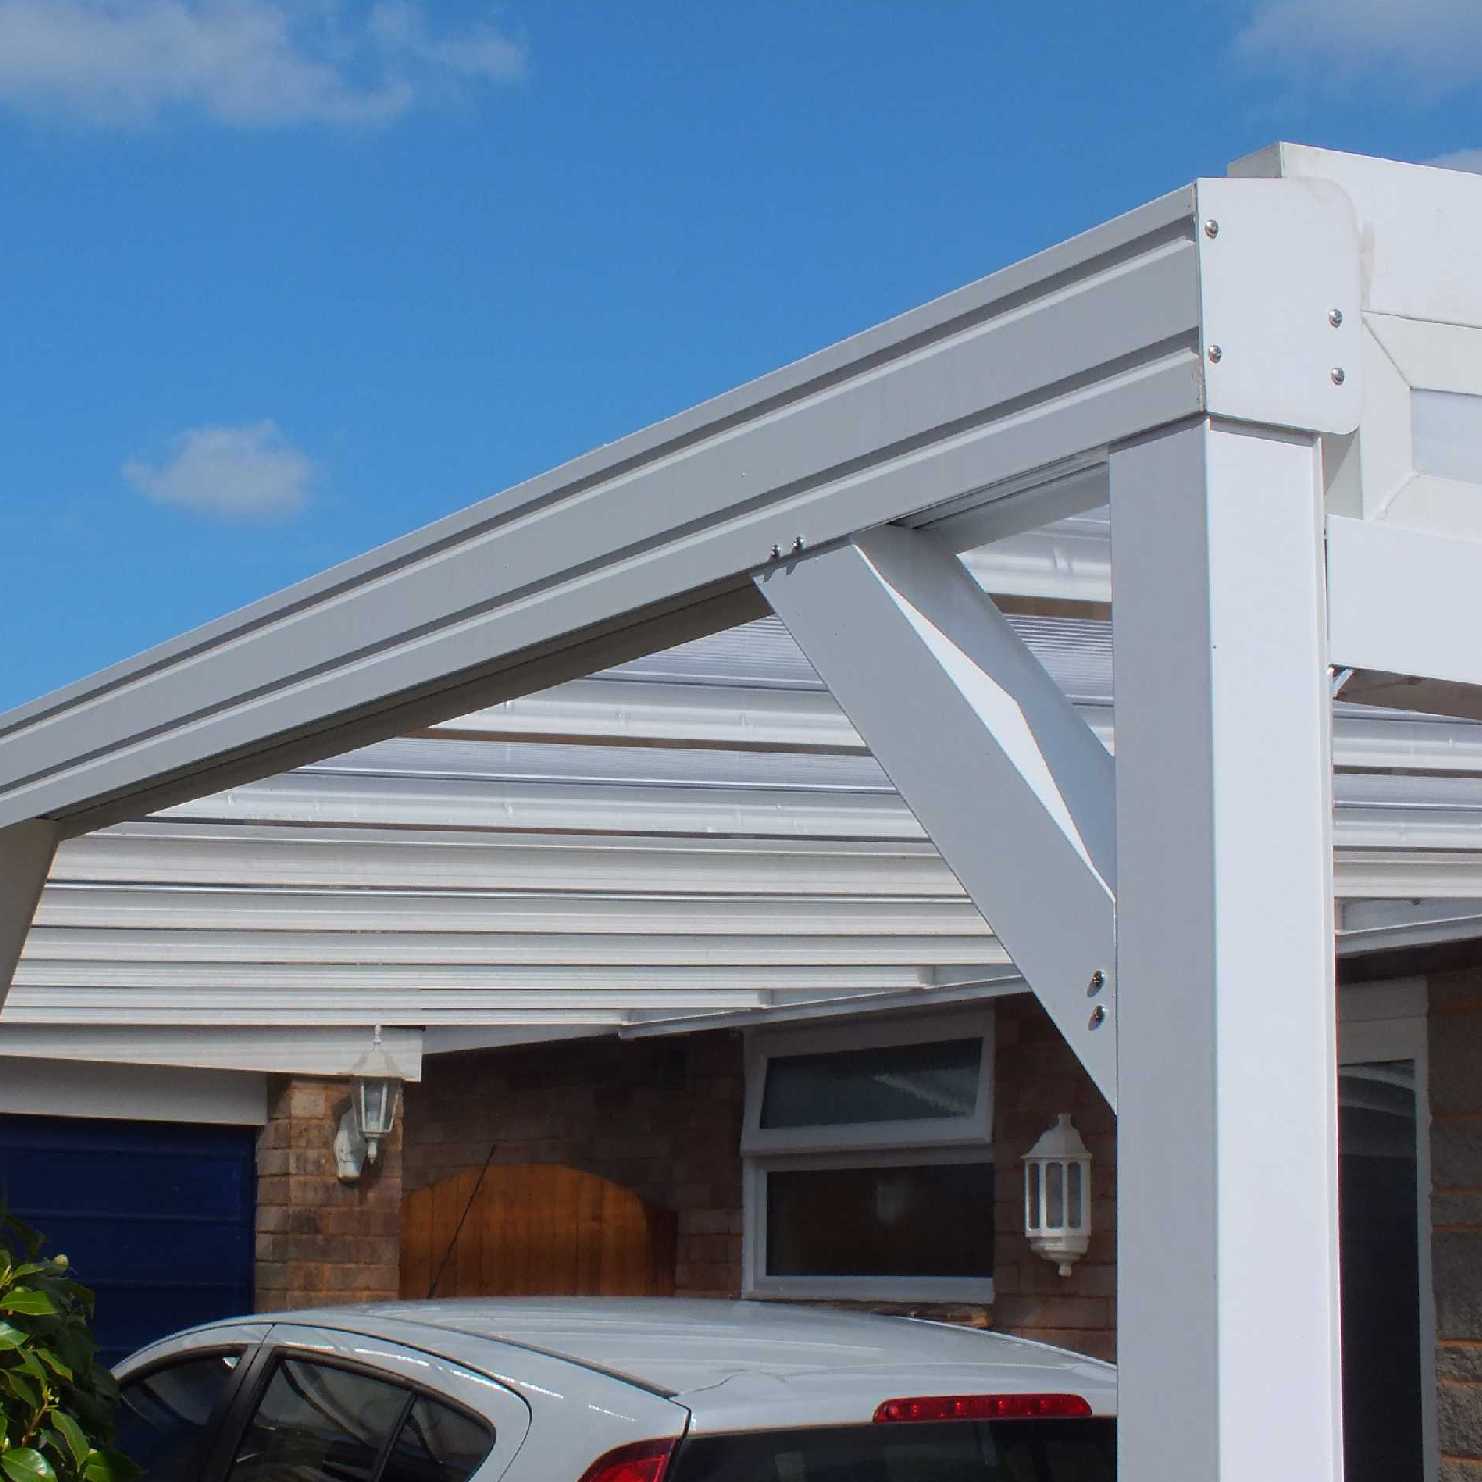 Buy Omega Smart Lean-To Canopy, White with 16mm Polycarbonate Glazing - 5.9m (W) x 4.5m (P), (3) Supporting Posts online today